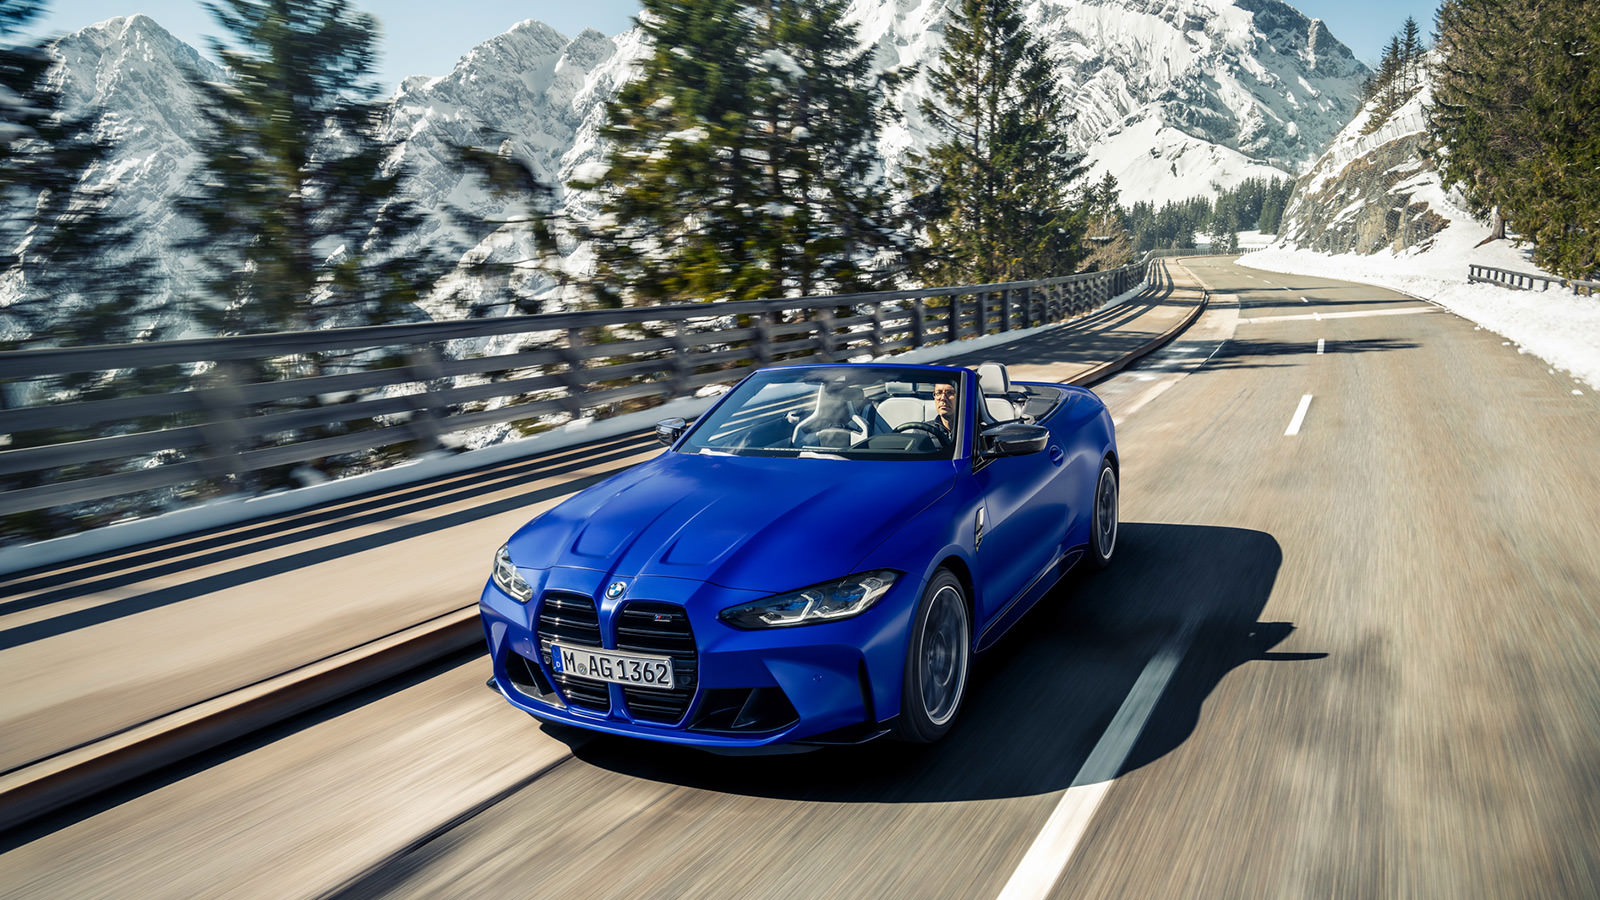 Feel The High Speed Breeze In The New 2022 BMW M4 Competition